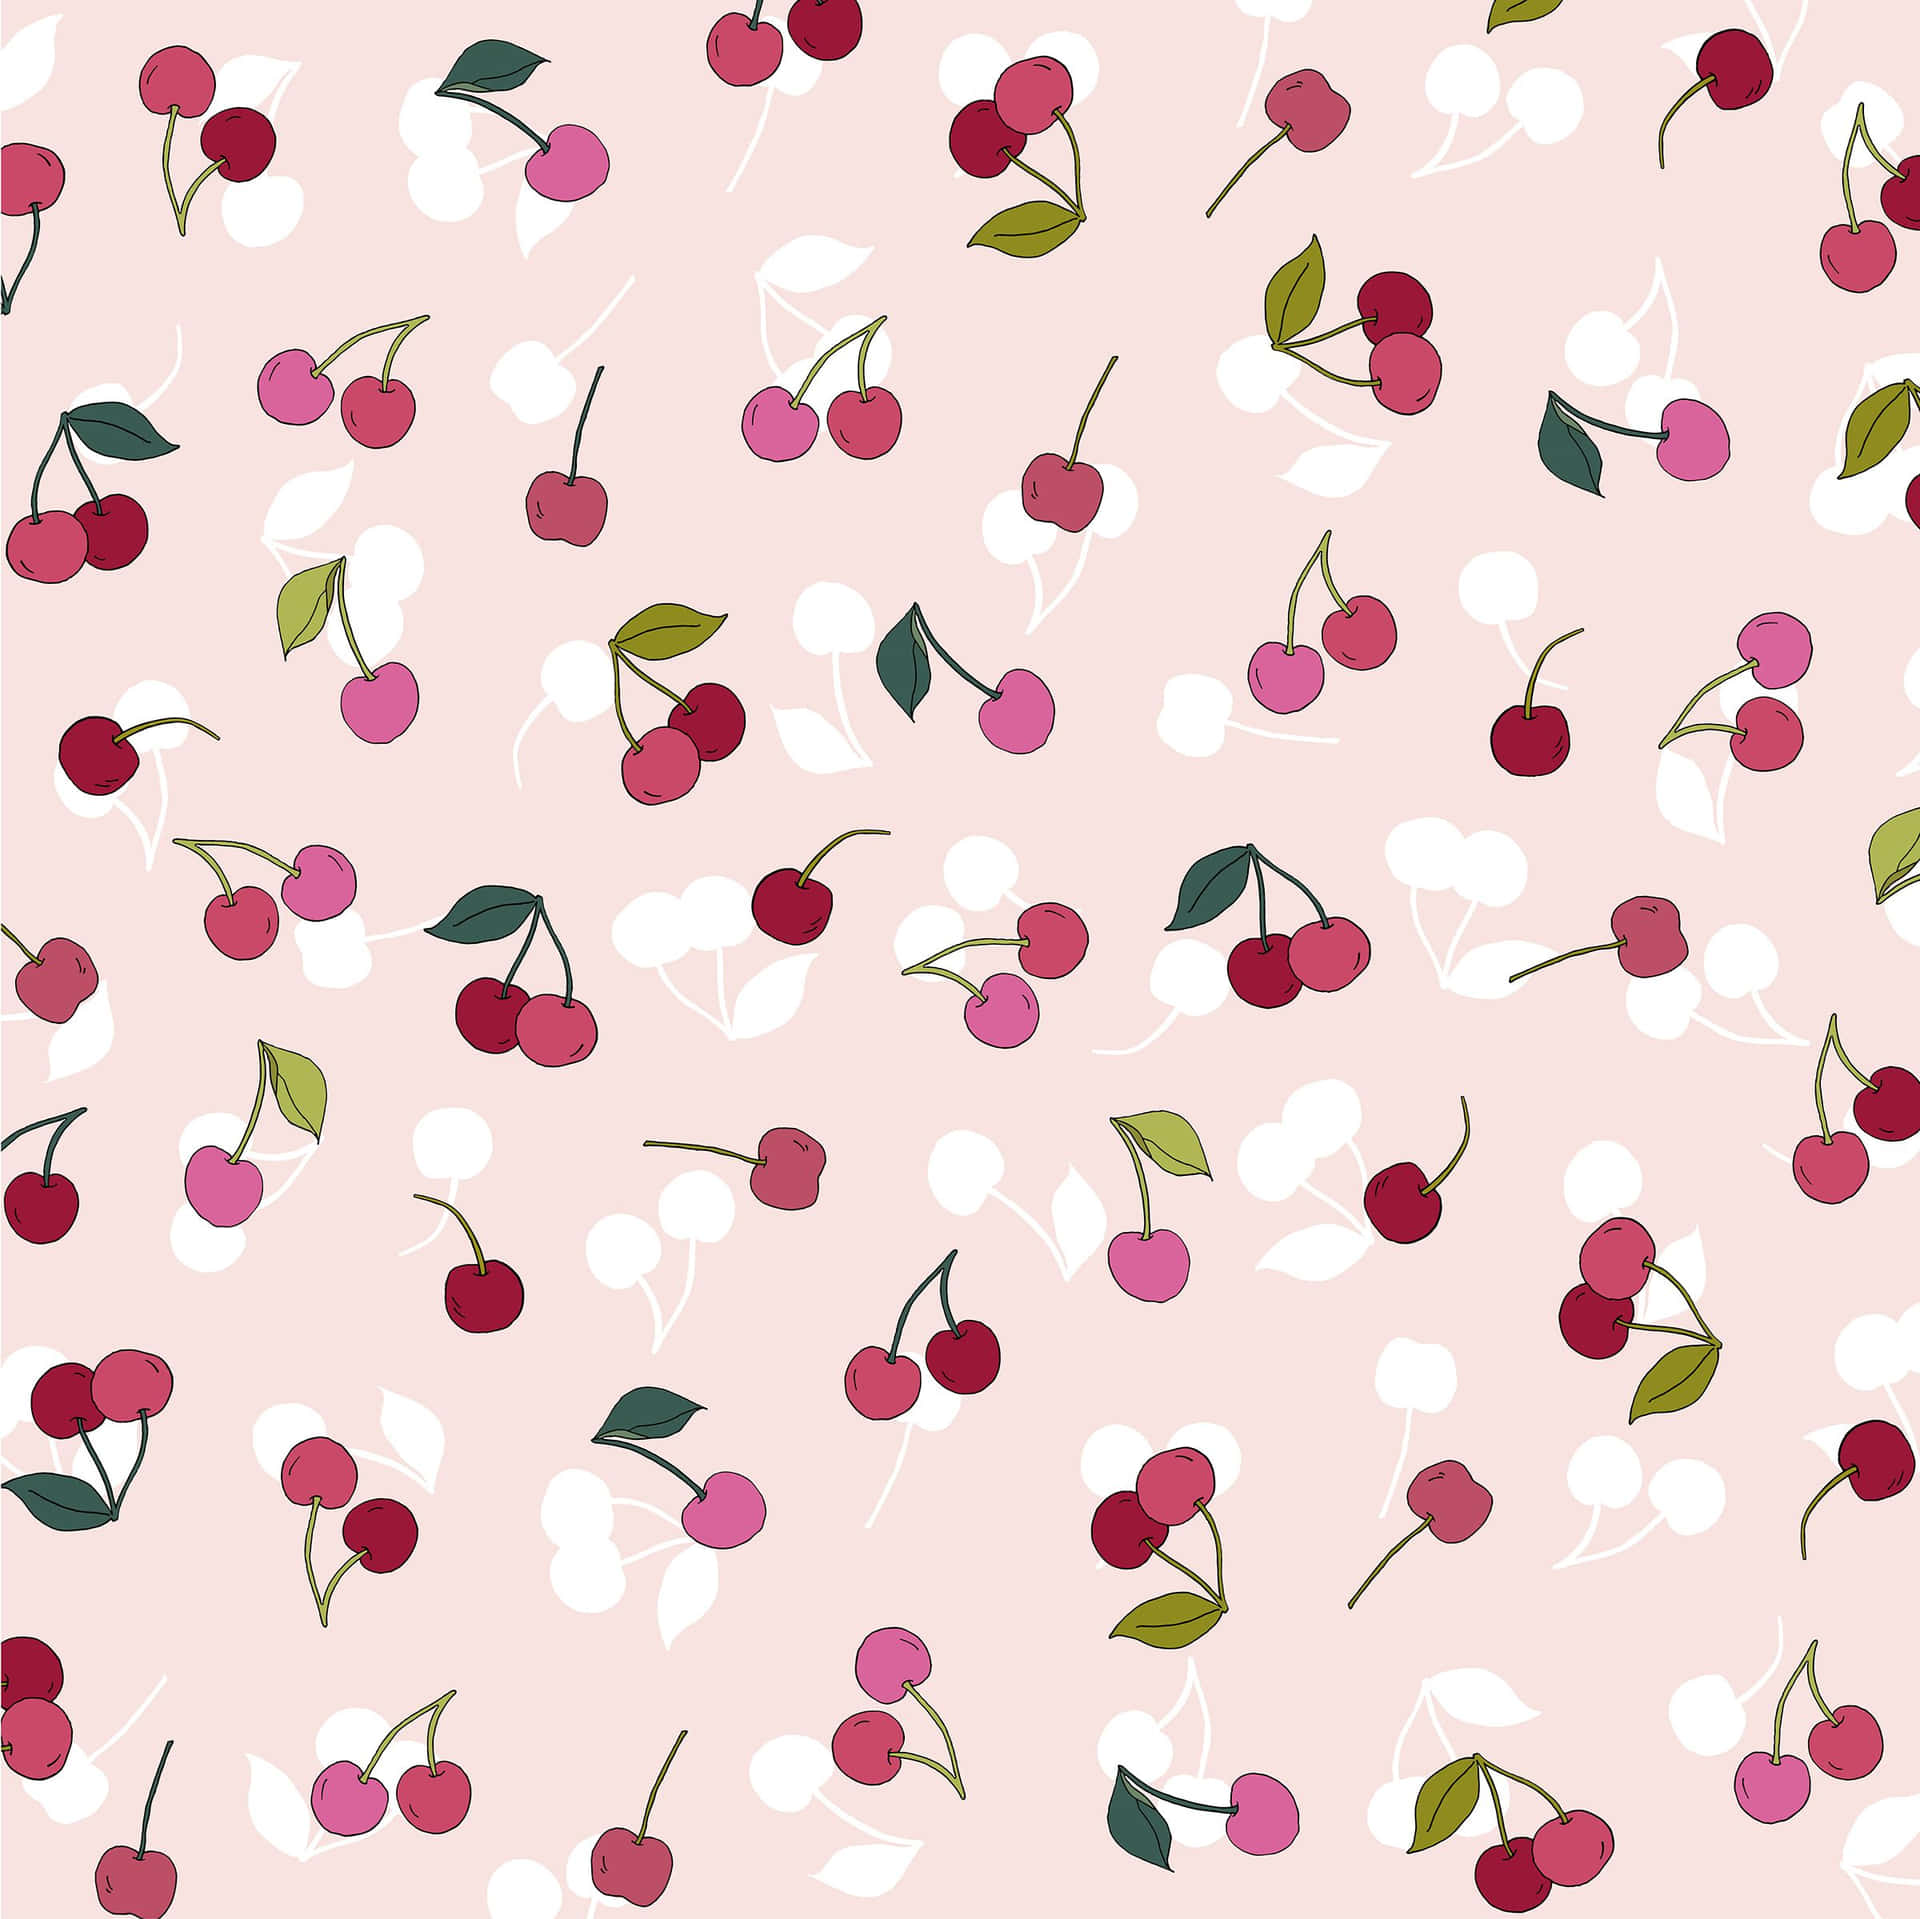 Aptly named “Cherry Aesthetic”, this beautiful background features a vibrant blend of orange, pink, and red. Wallpaper